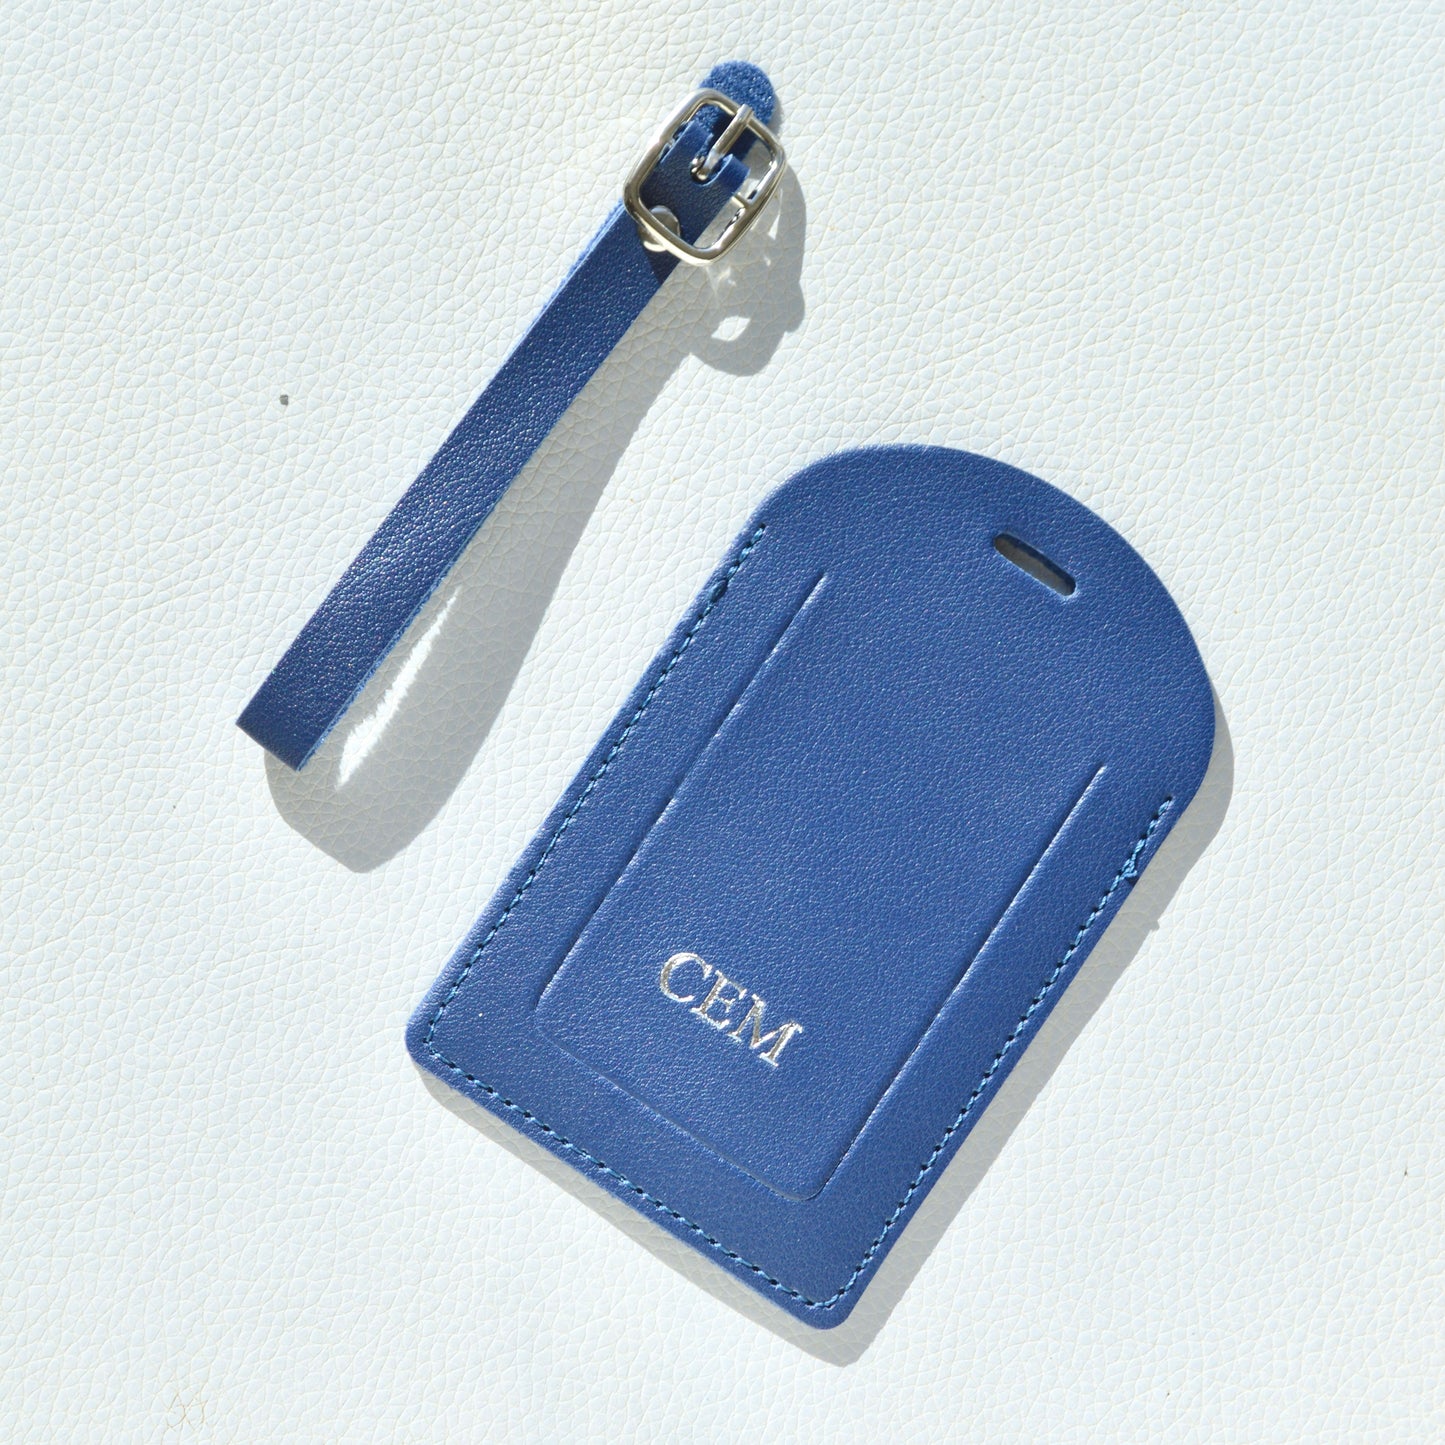 LUGGAGE TAG IN BLUE SAFFIANO LEATHER